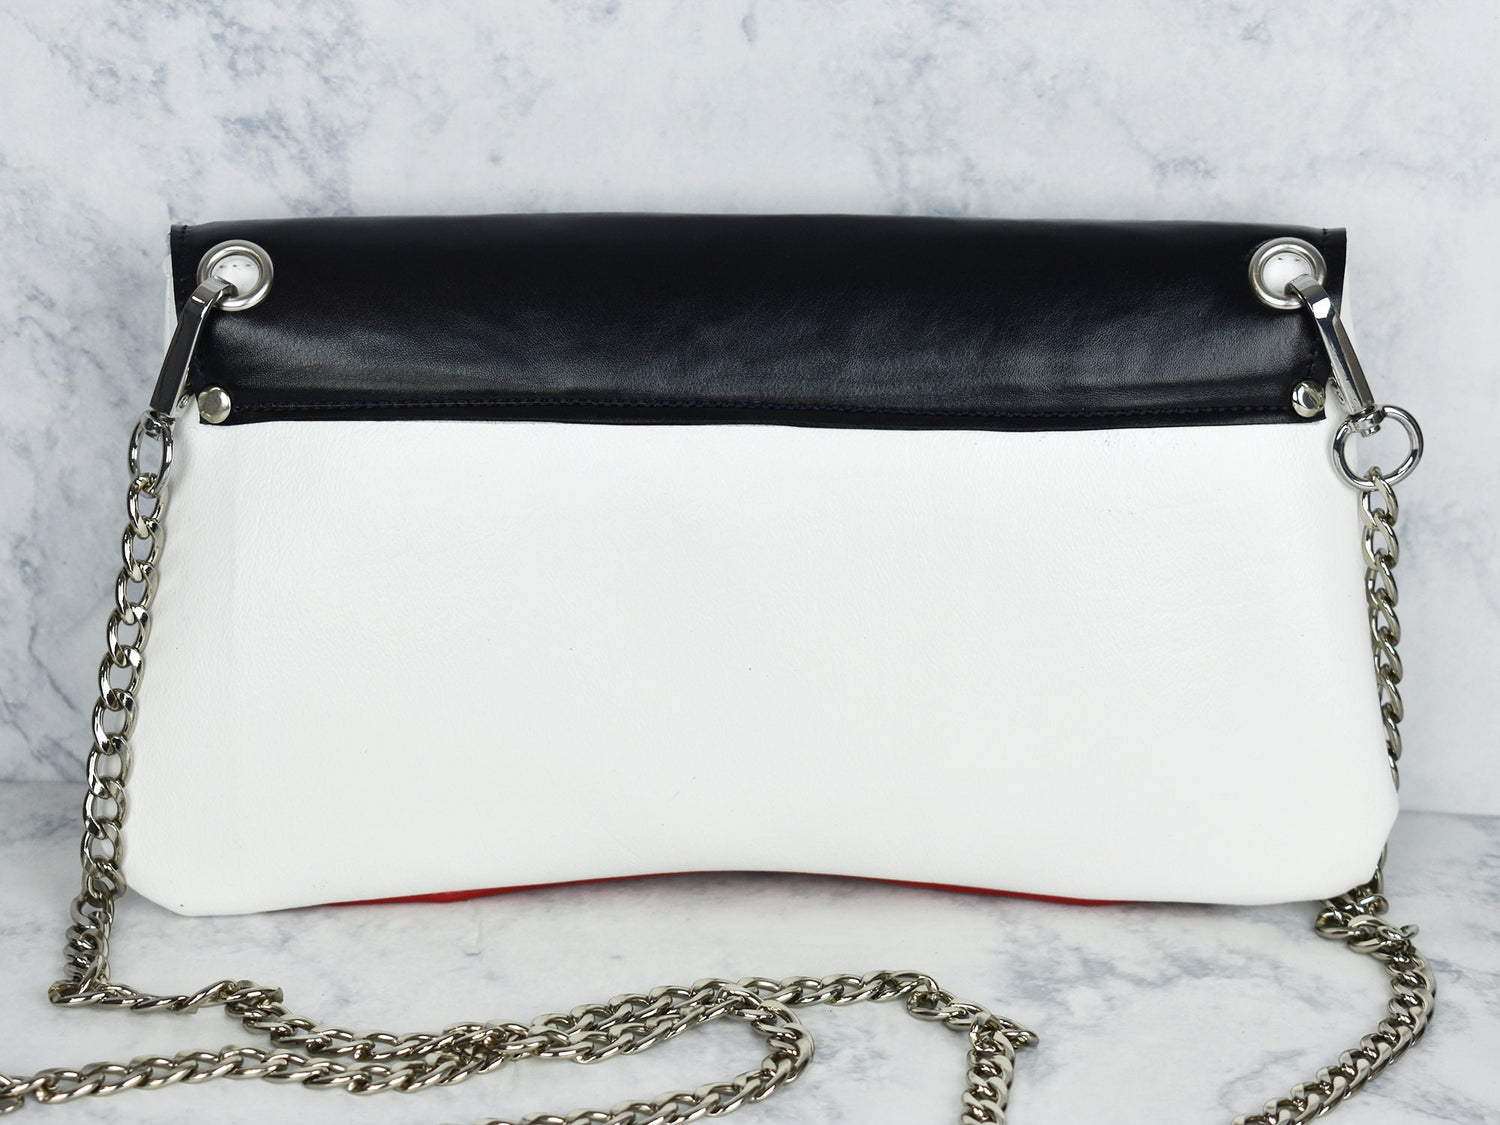 Women's Evening Clutch Purse - Minimulist Ladies Satchel - Bag for Wedding - Faux Leather Purse - Statement Piece - Gift for Mother's Day